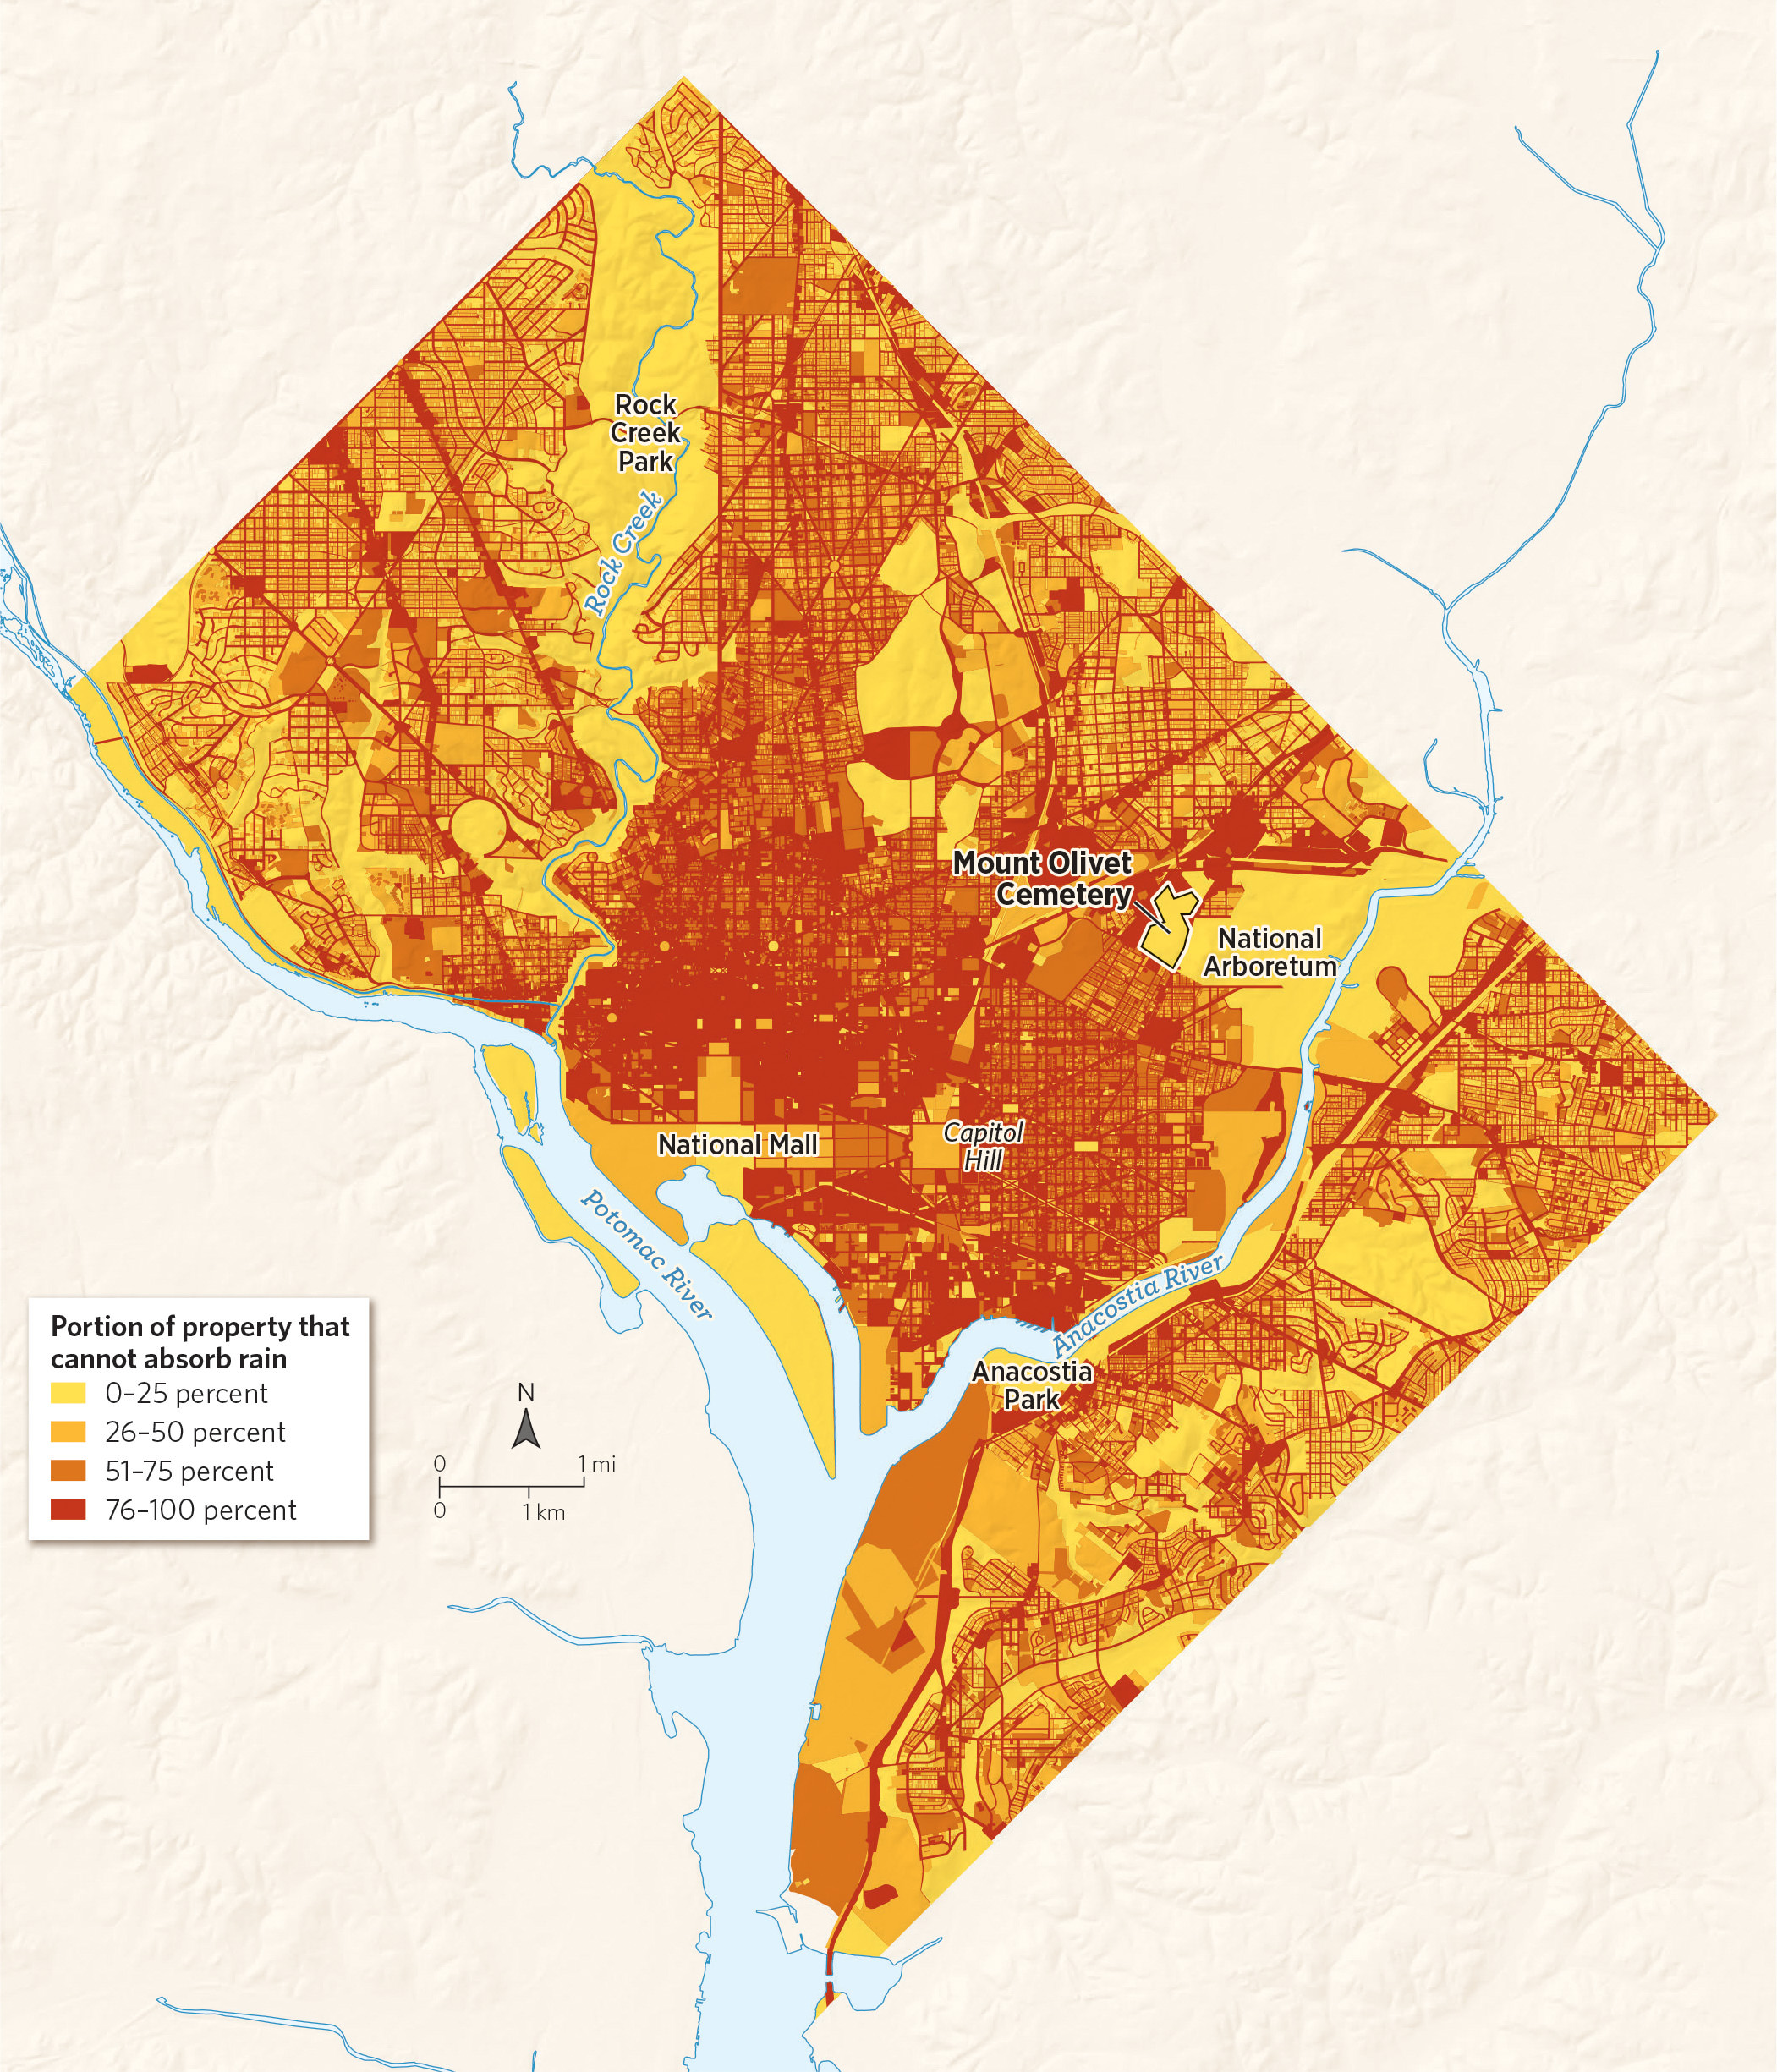 A map of Washington, D.C., where red areas cannot absorb stormwater.